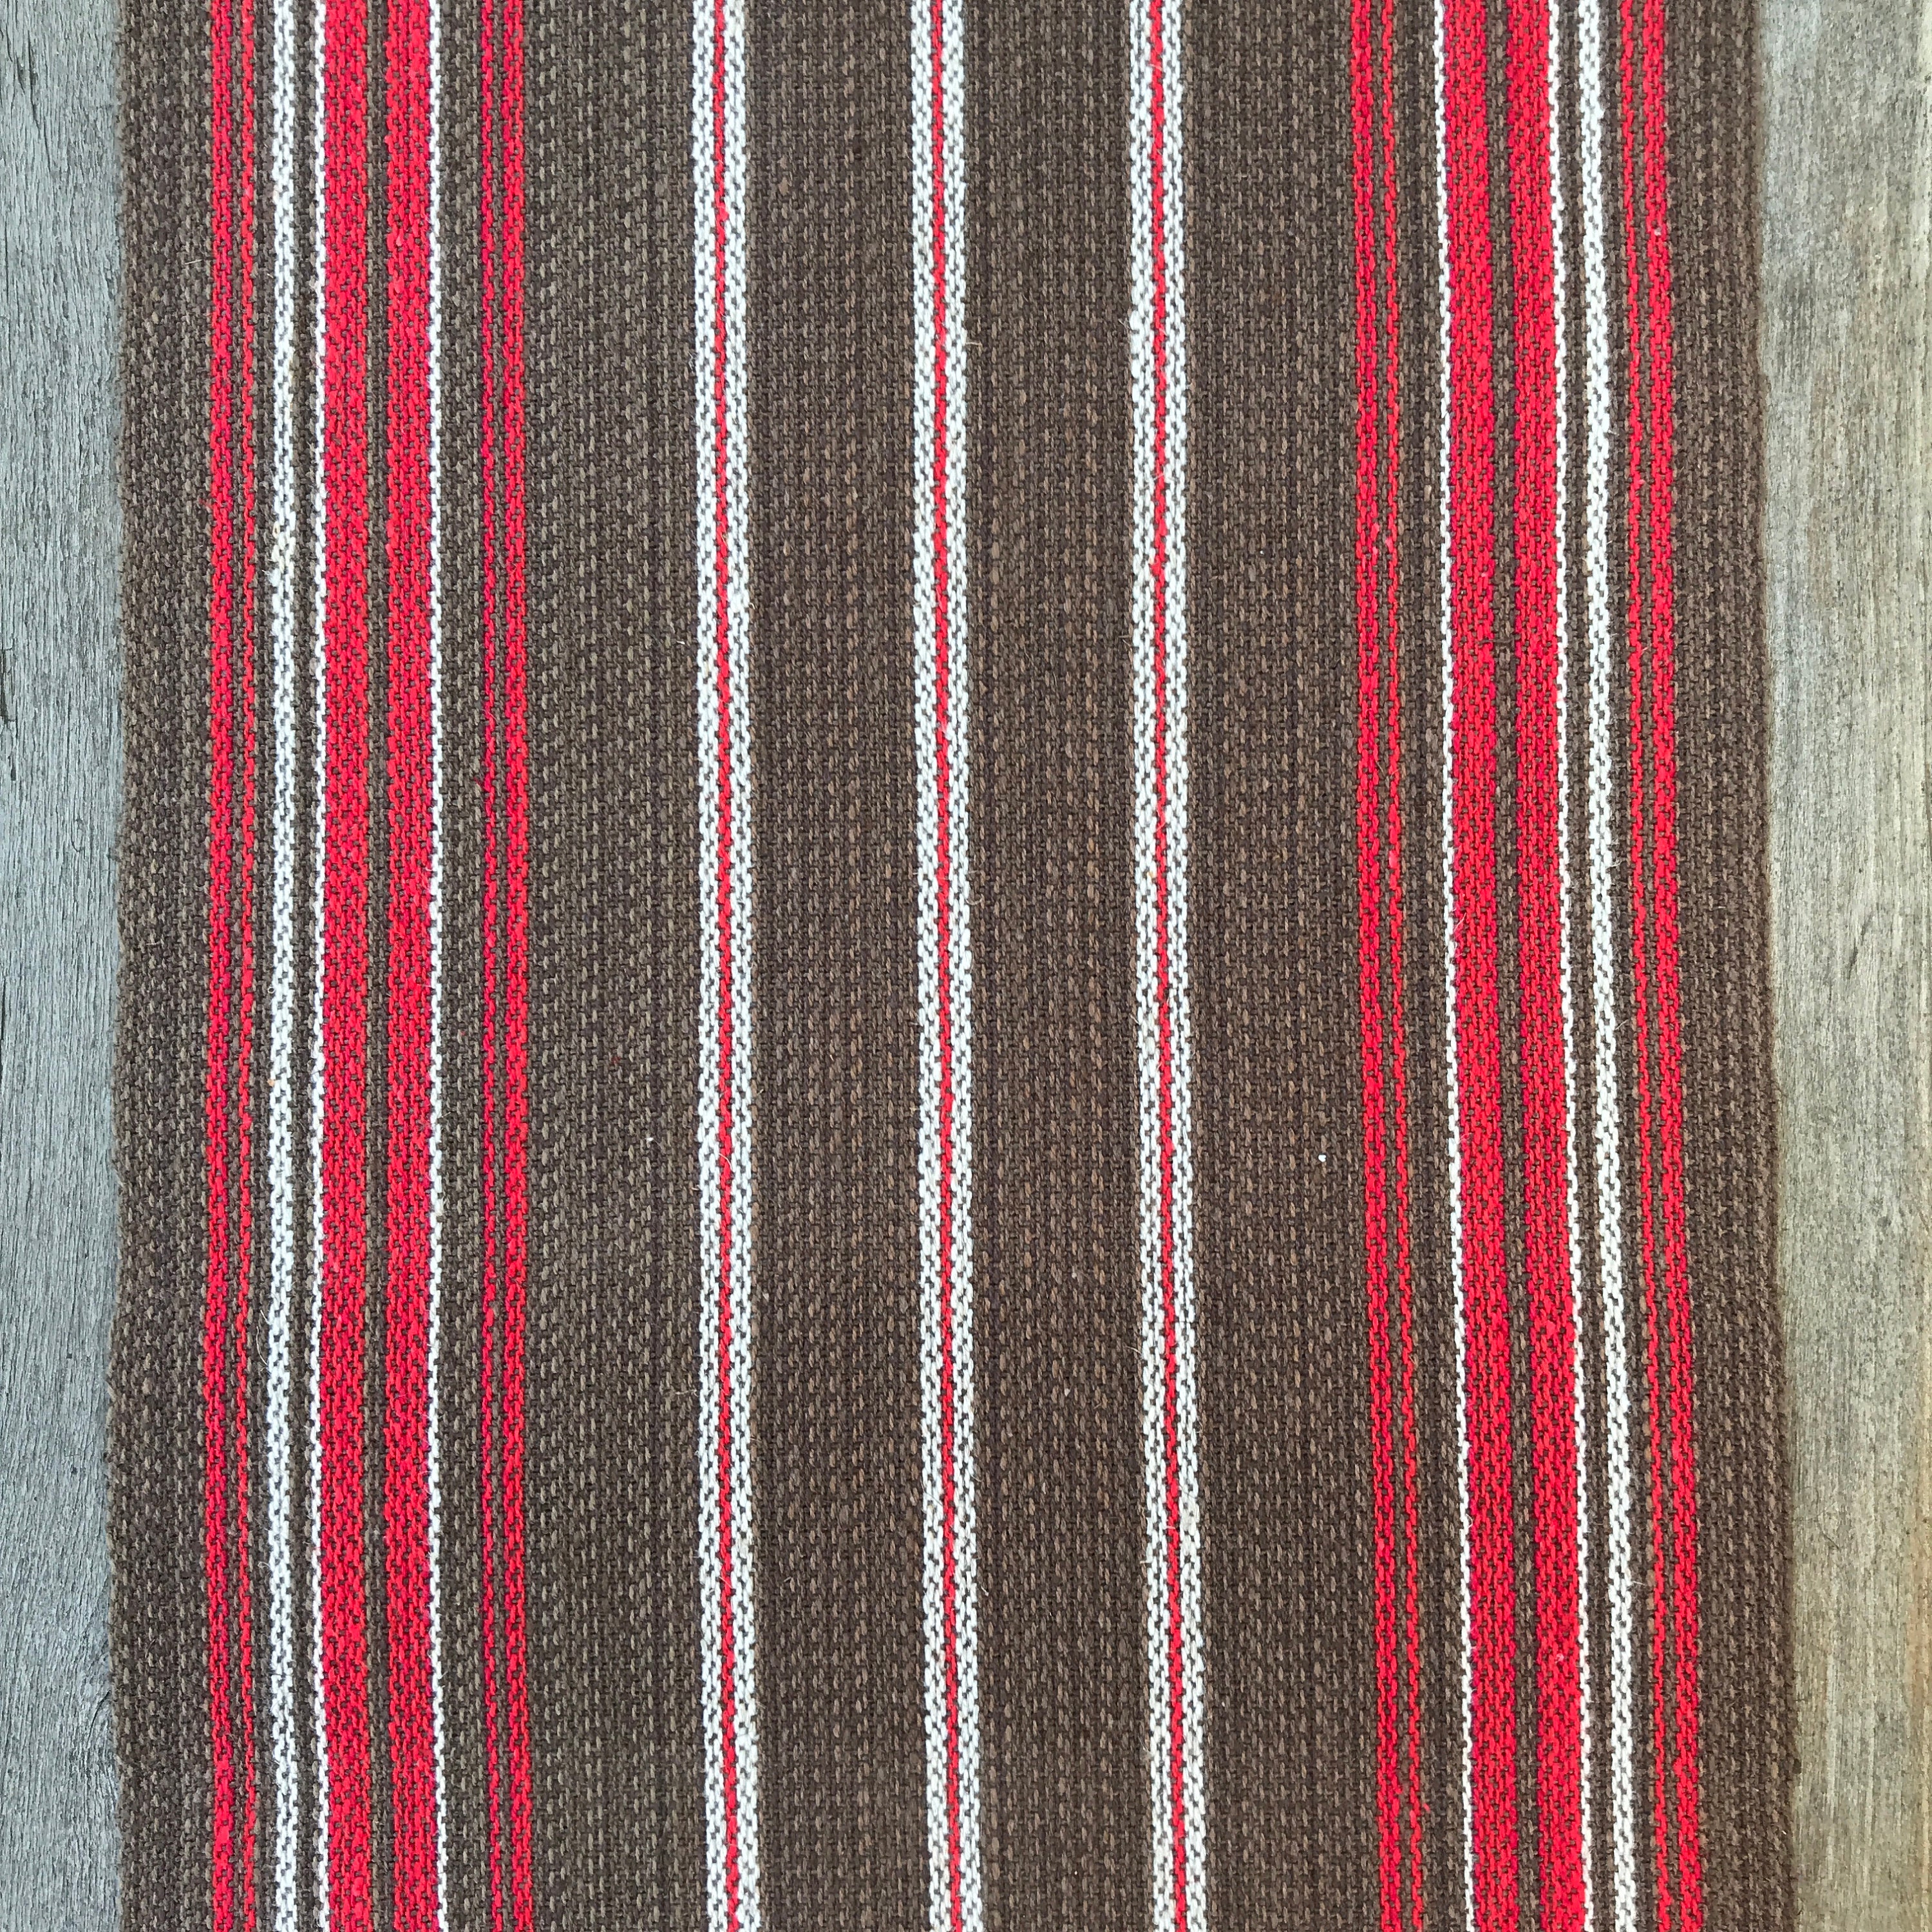 Swedish Woven Tablerunner/Vintage Scandinave Textile Lin Brown Red Rustic Cottage Style Christmas Cl